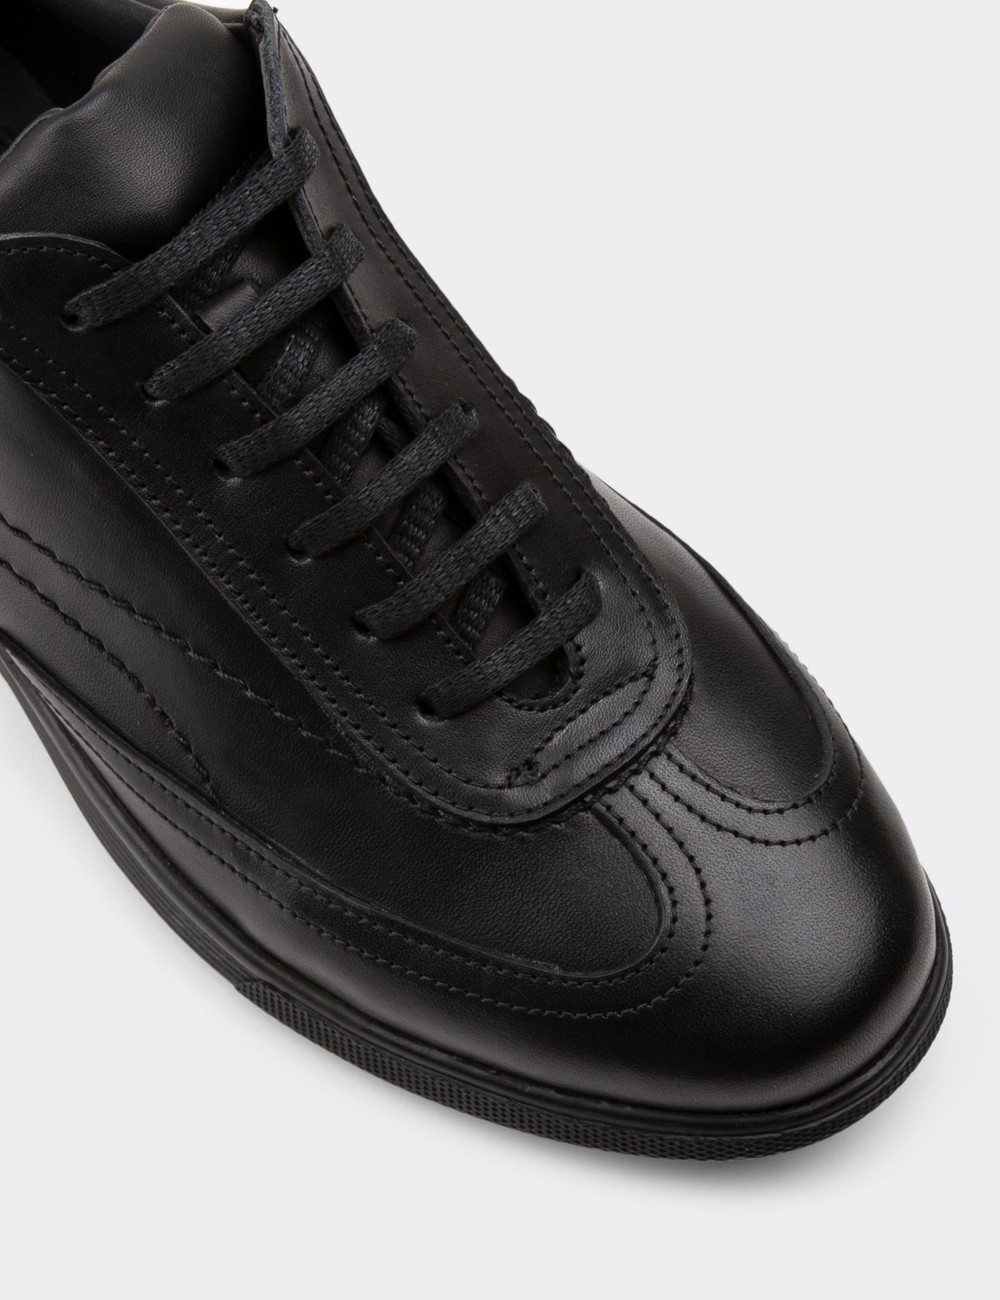 Black  Leather Lace-up Shoes - 00321MSYHC07